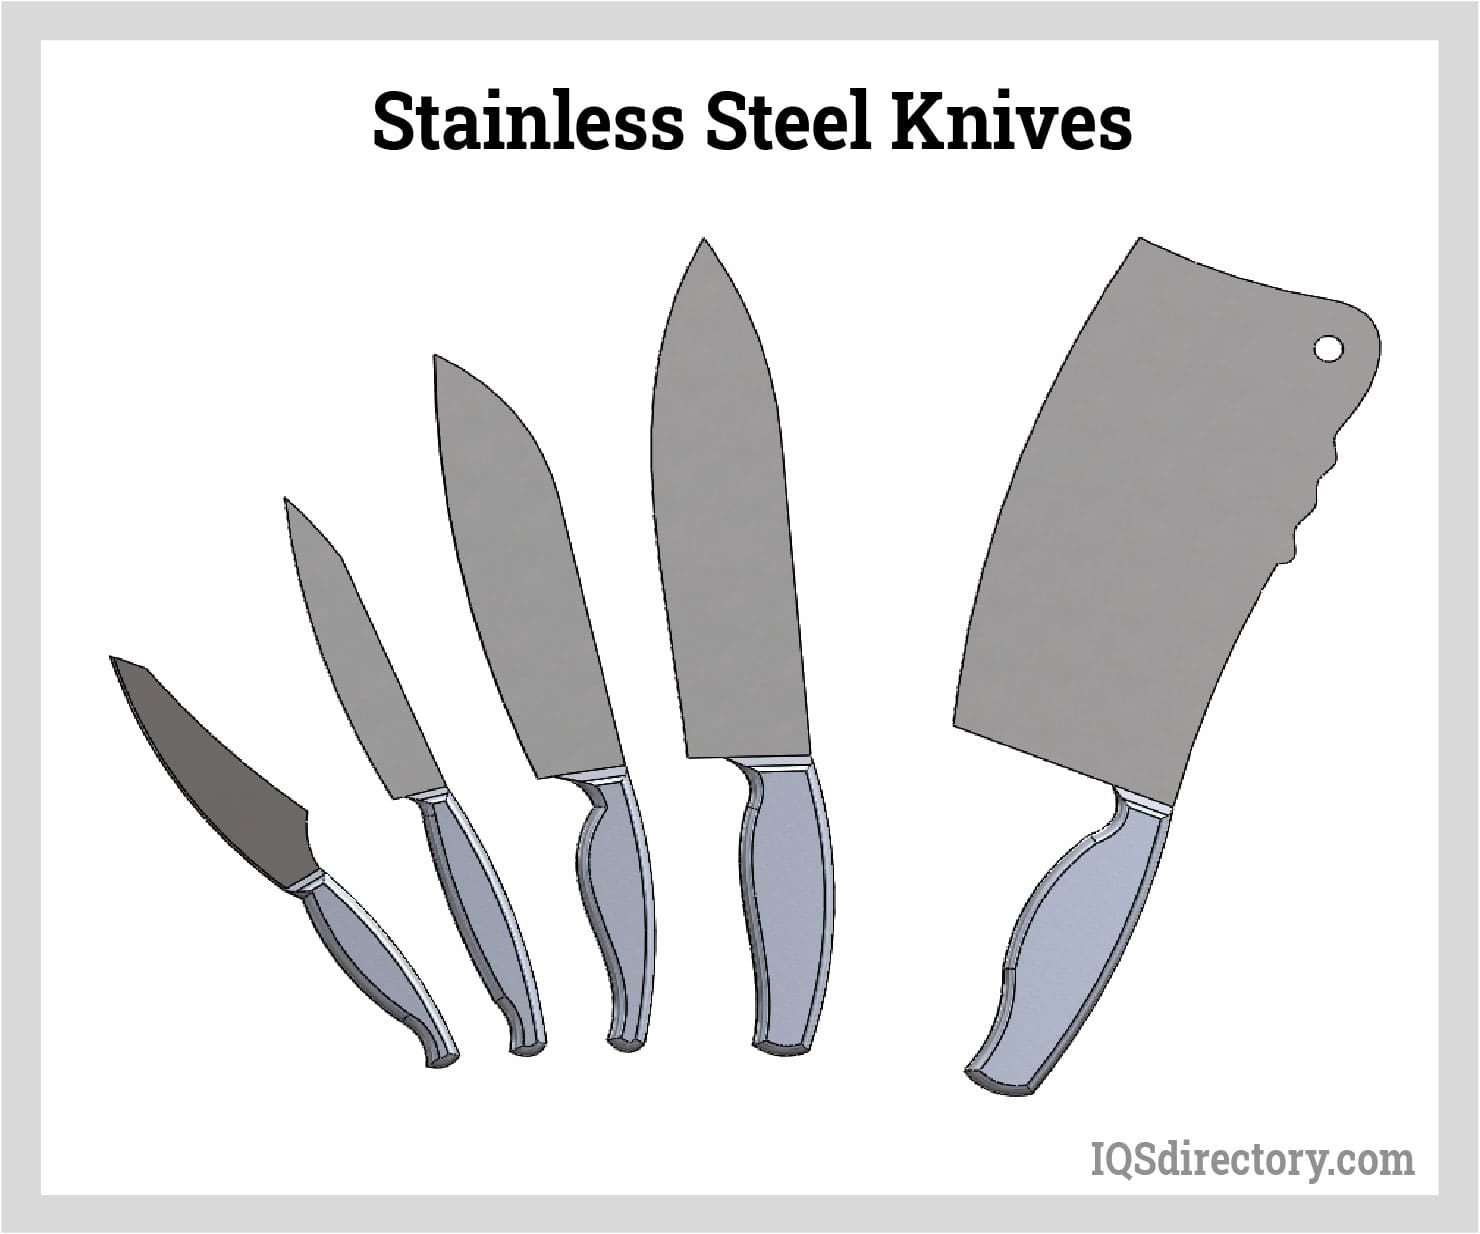 different types of the stainless steel